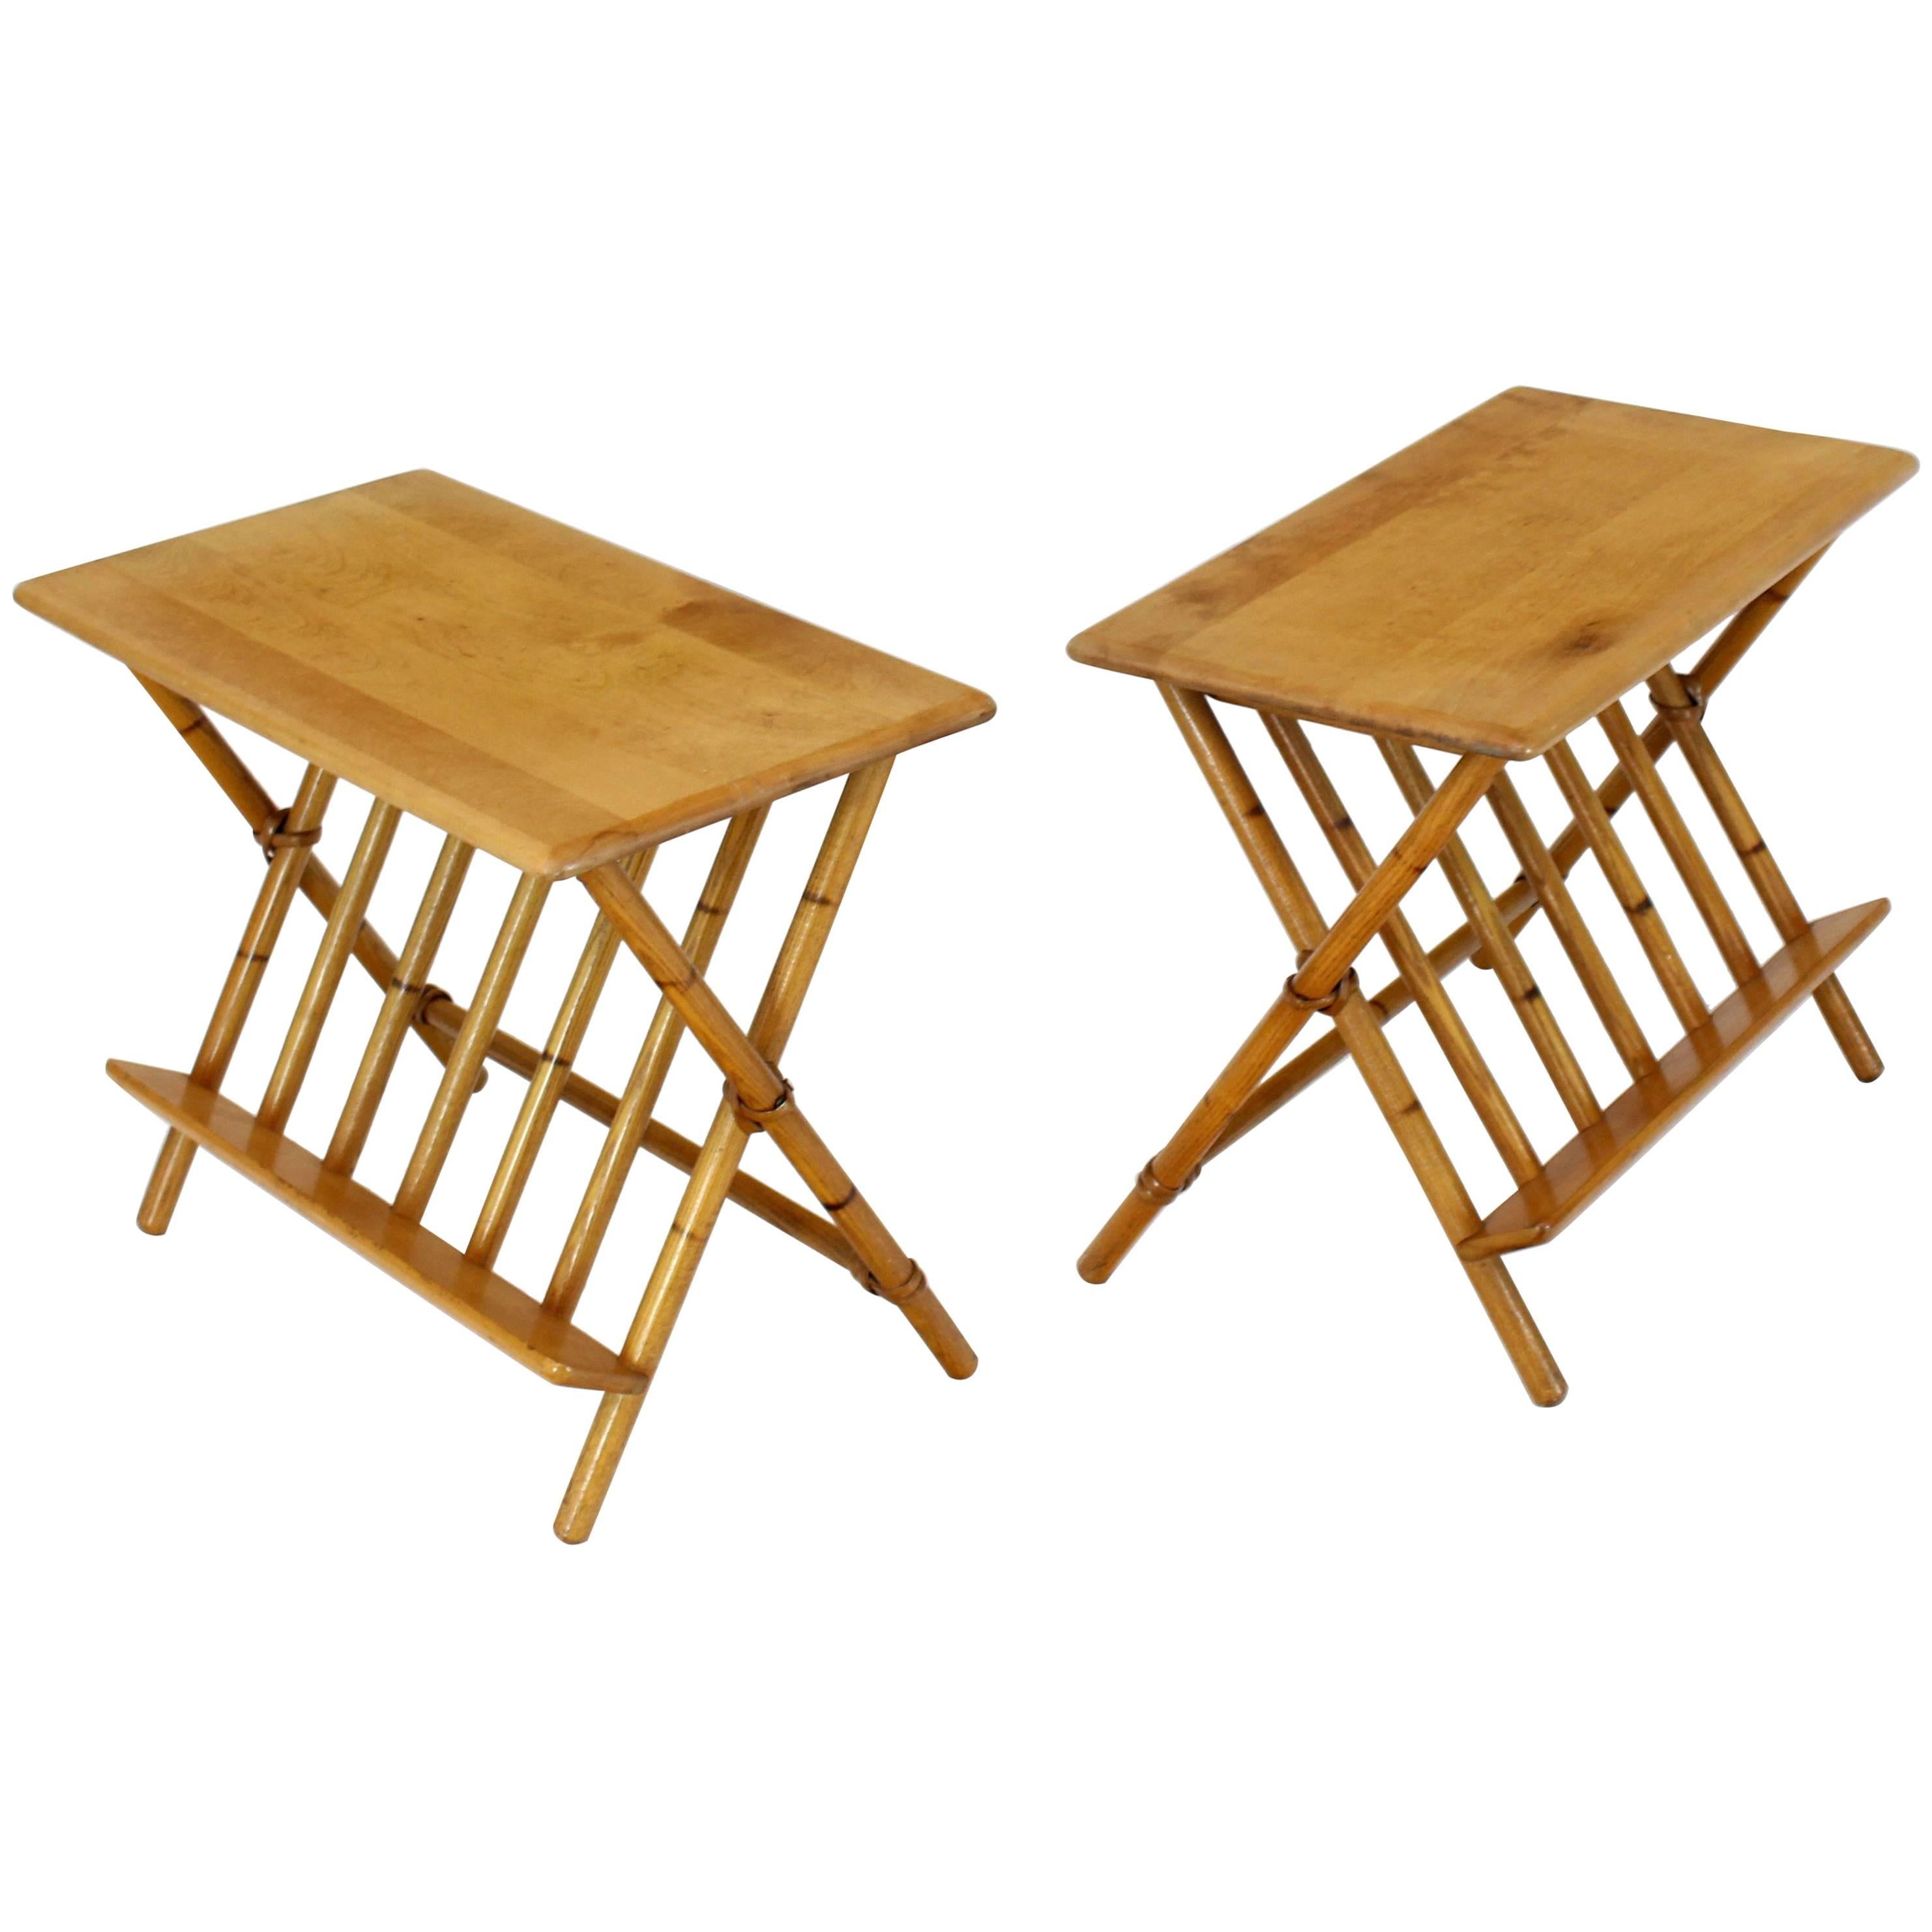 Pair of Faux Burnt Bamboo X-Base Rectangular Side End Tables with Magazine Rack